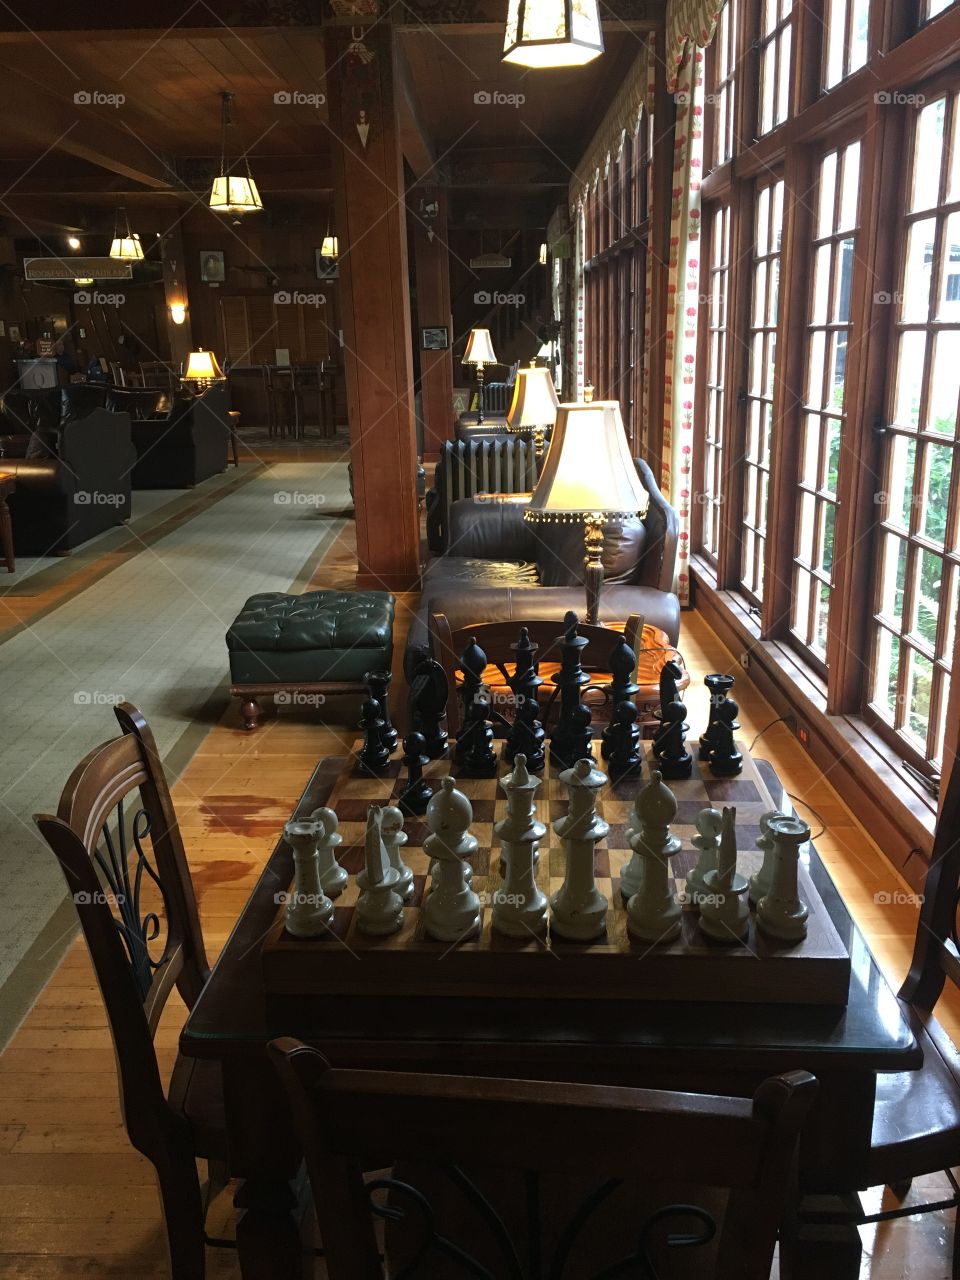  Chessboard? Lake Quinault Lodge, Olympic National Park